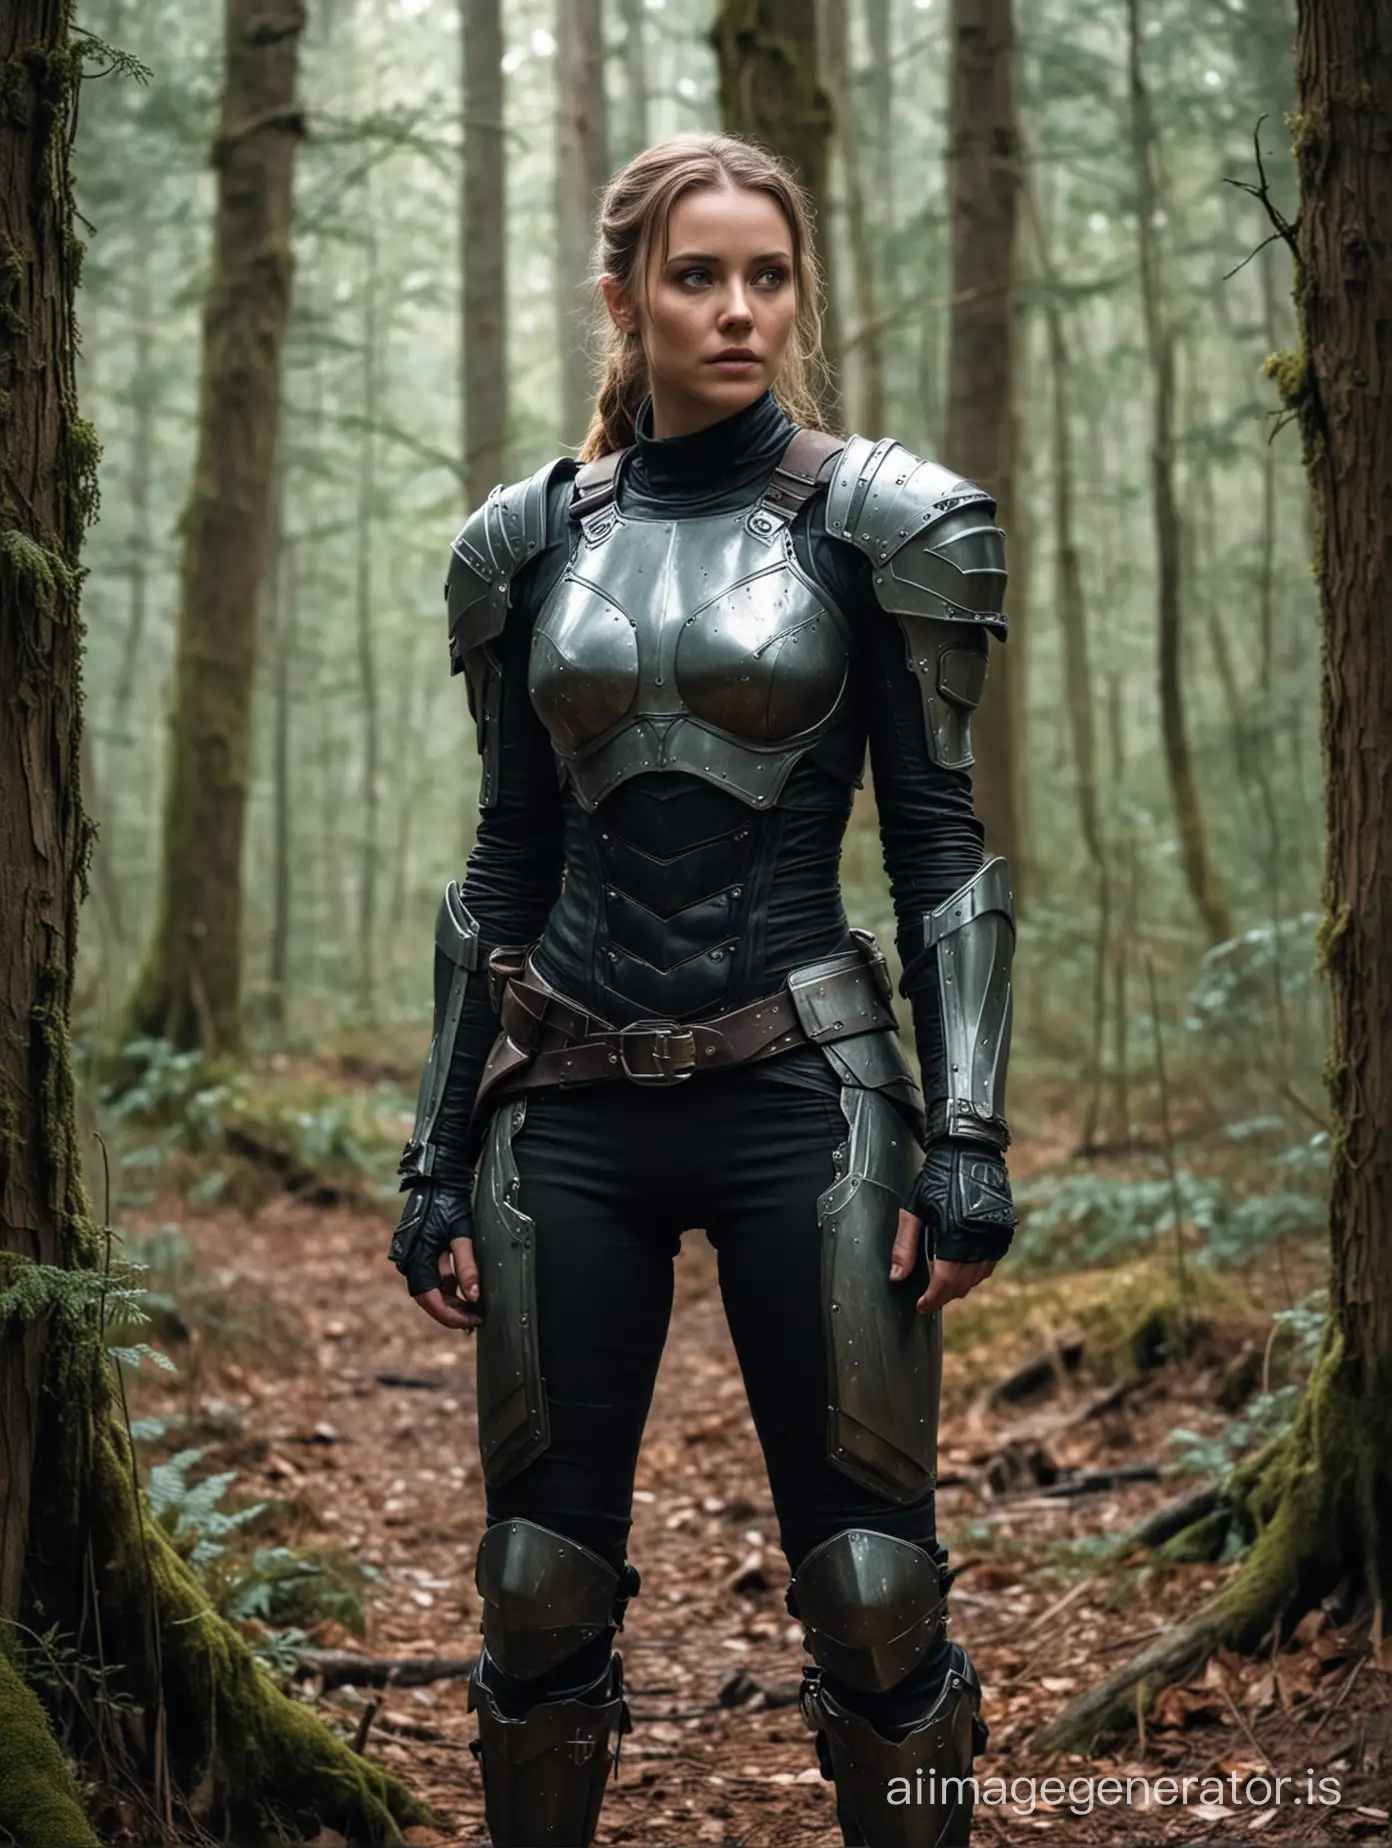 combining sci-fi and tolkien-like fantasy: The fighter, standing, exhausted, in the woods. Her skimpy, enhanced, armor dirty. Her slain foes laying around her